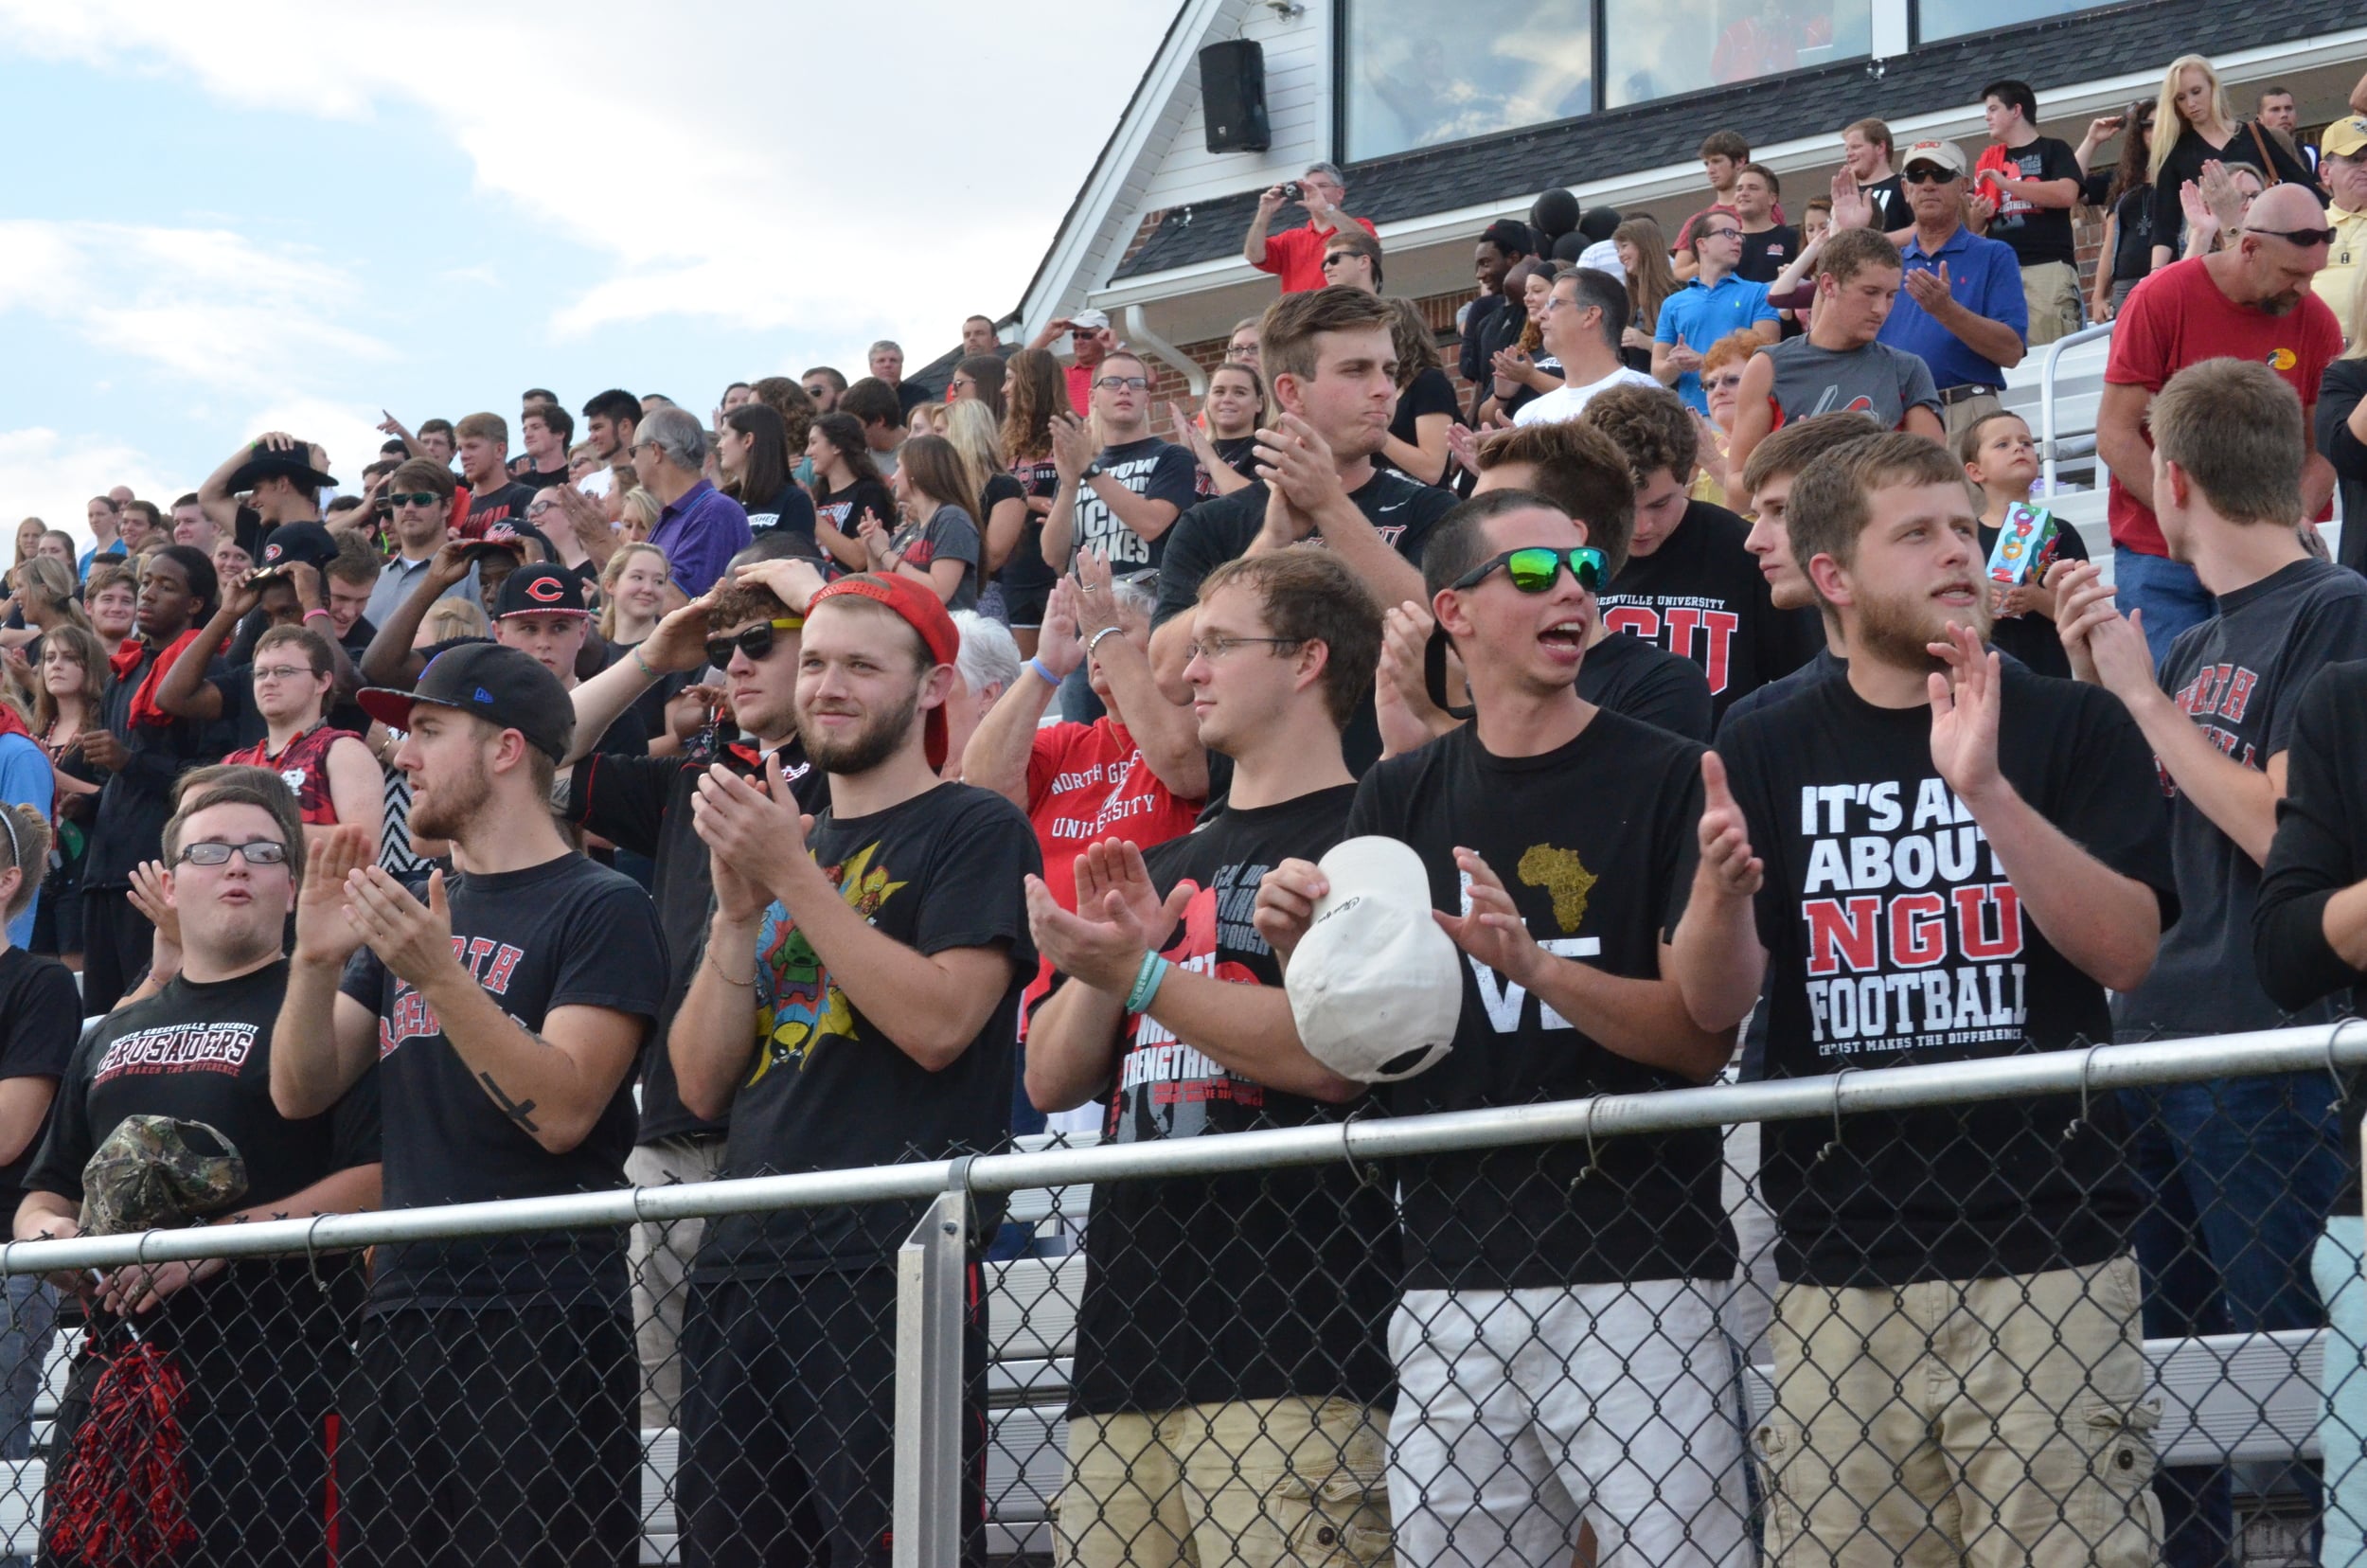  NGU students getting excited at the start of the game 